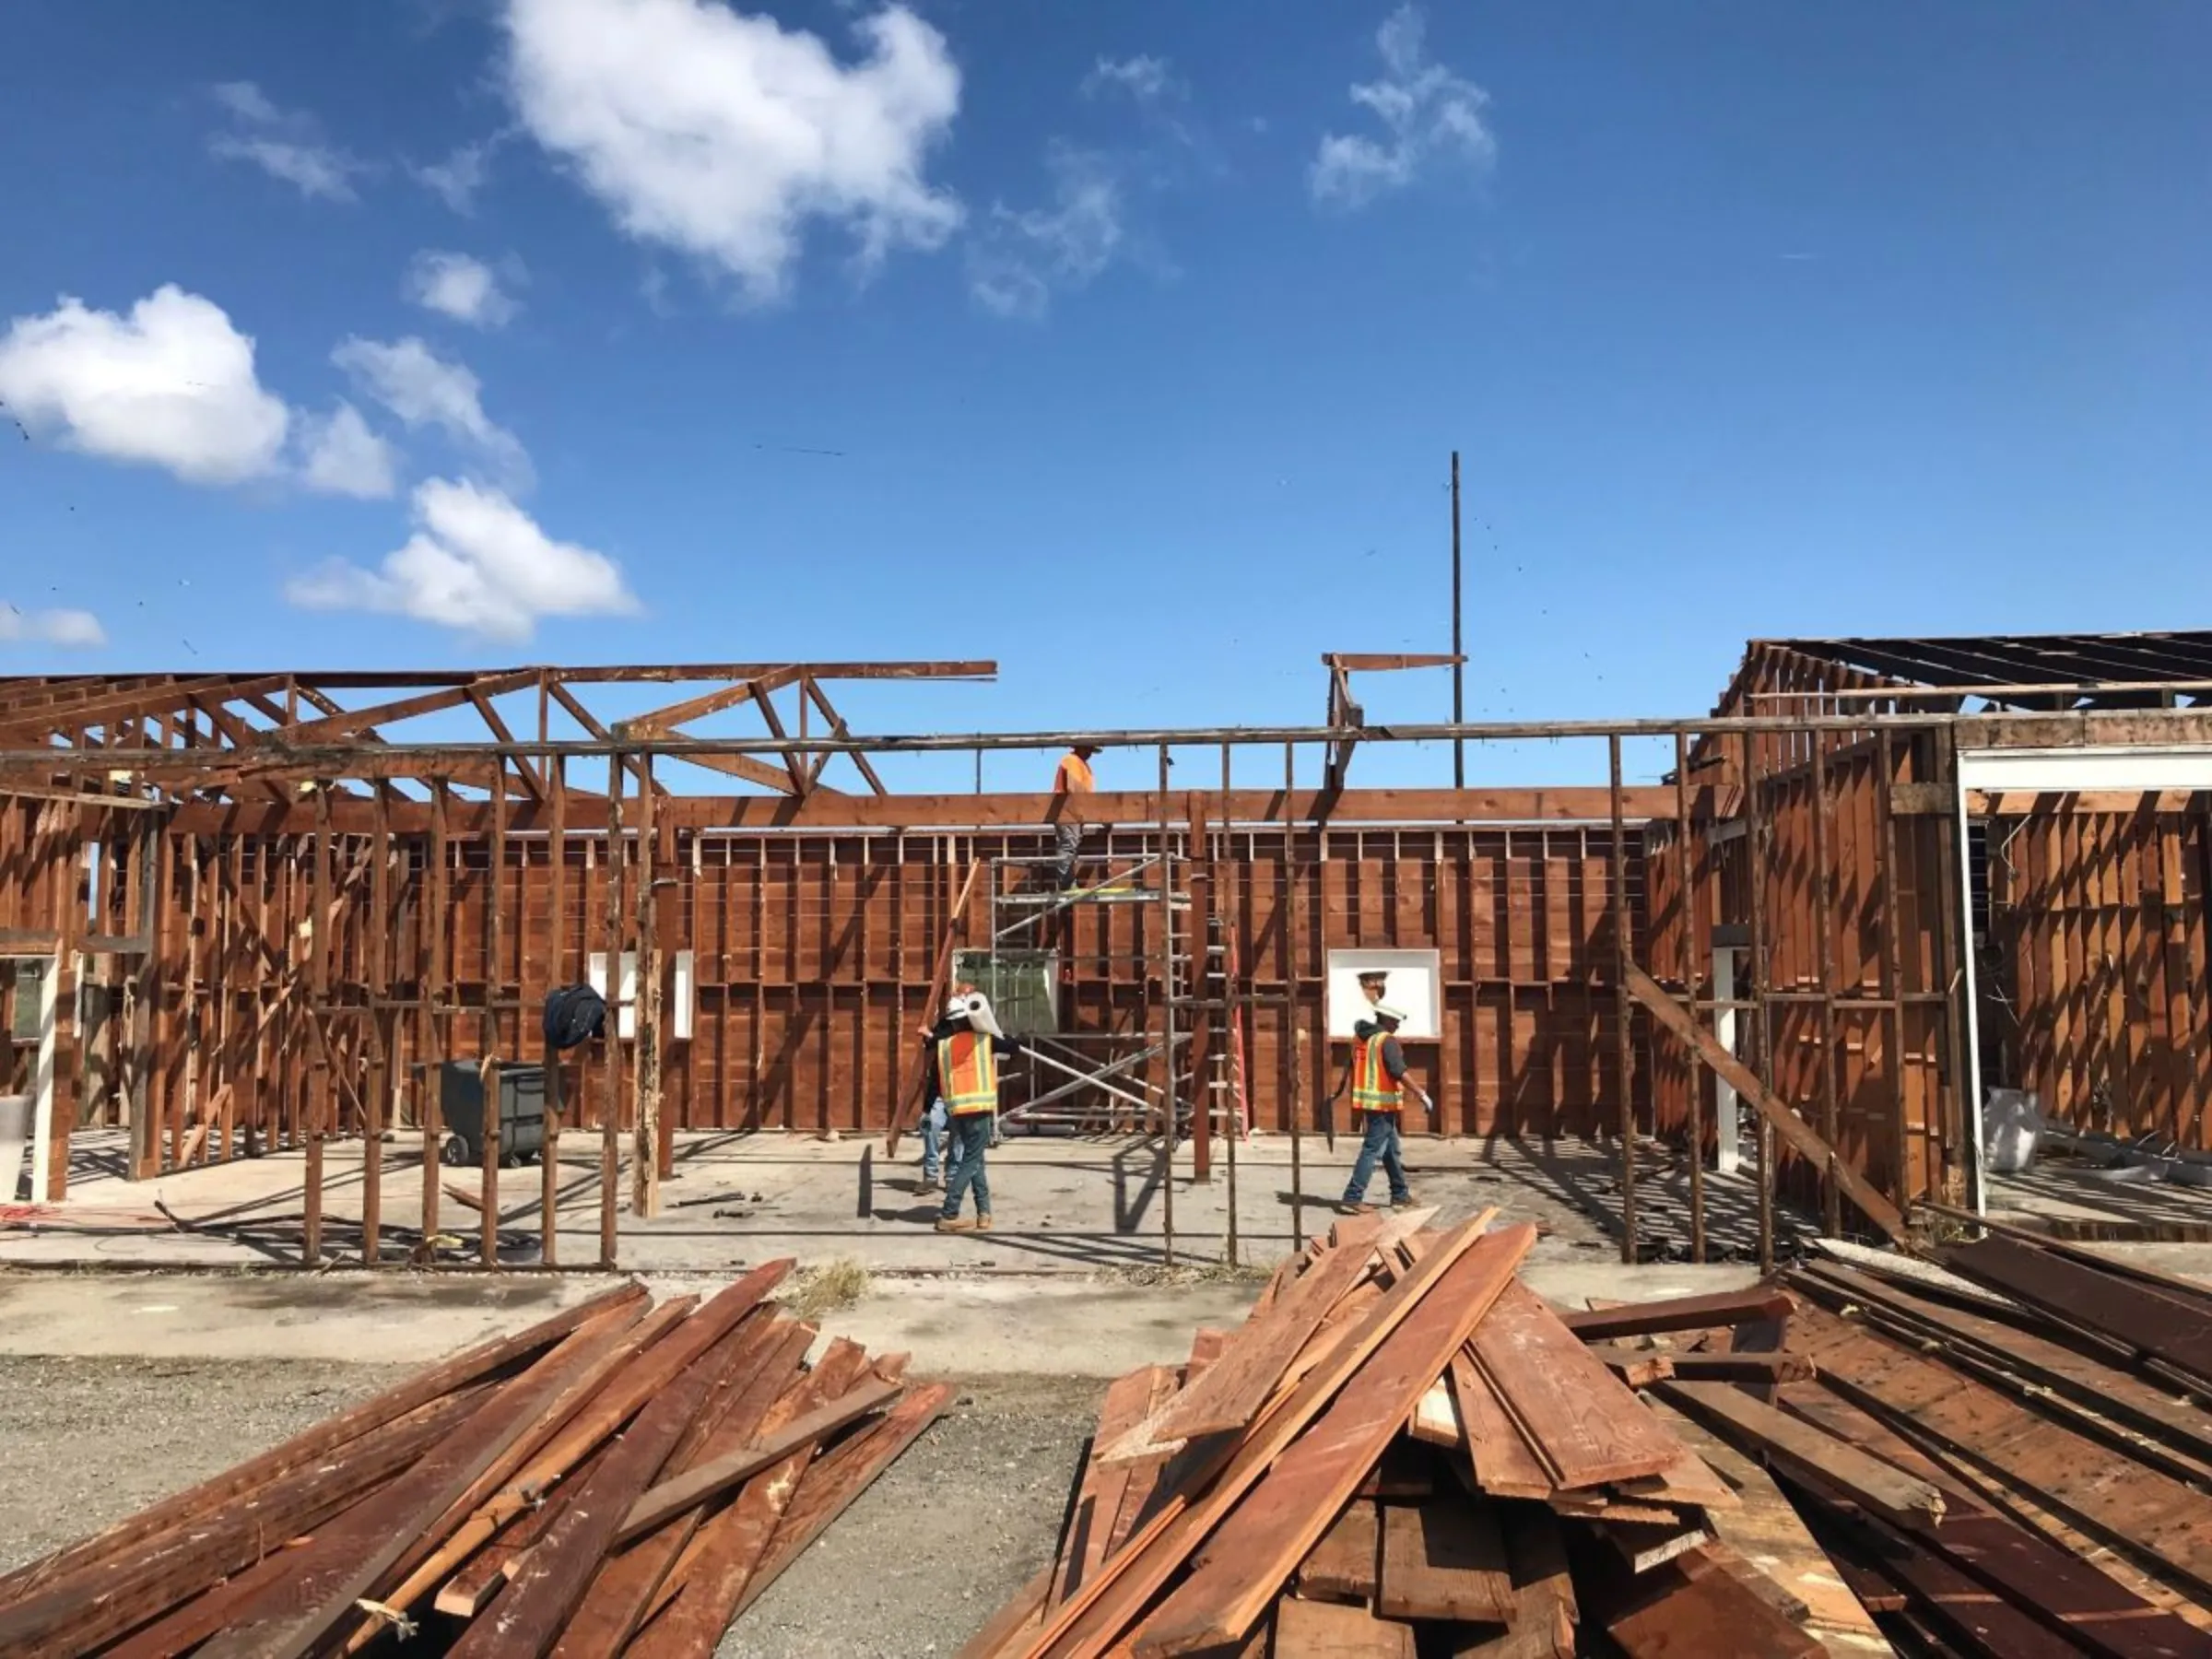 Workers take apart a commercial building as part of a deconstruction project in Palo Alto, California, in 2019. Zero Waste Palo Alto/Handout via Thomson Reuters Foundation